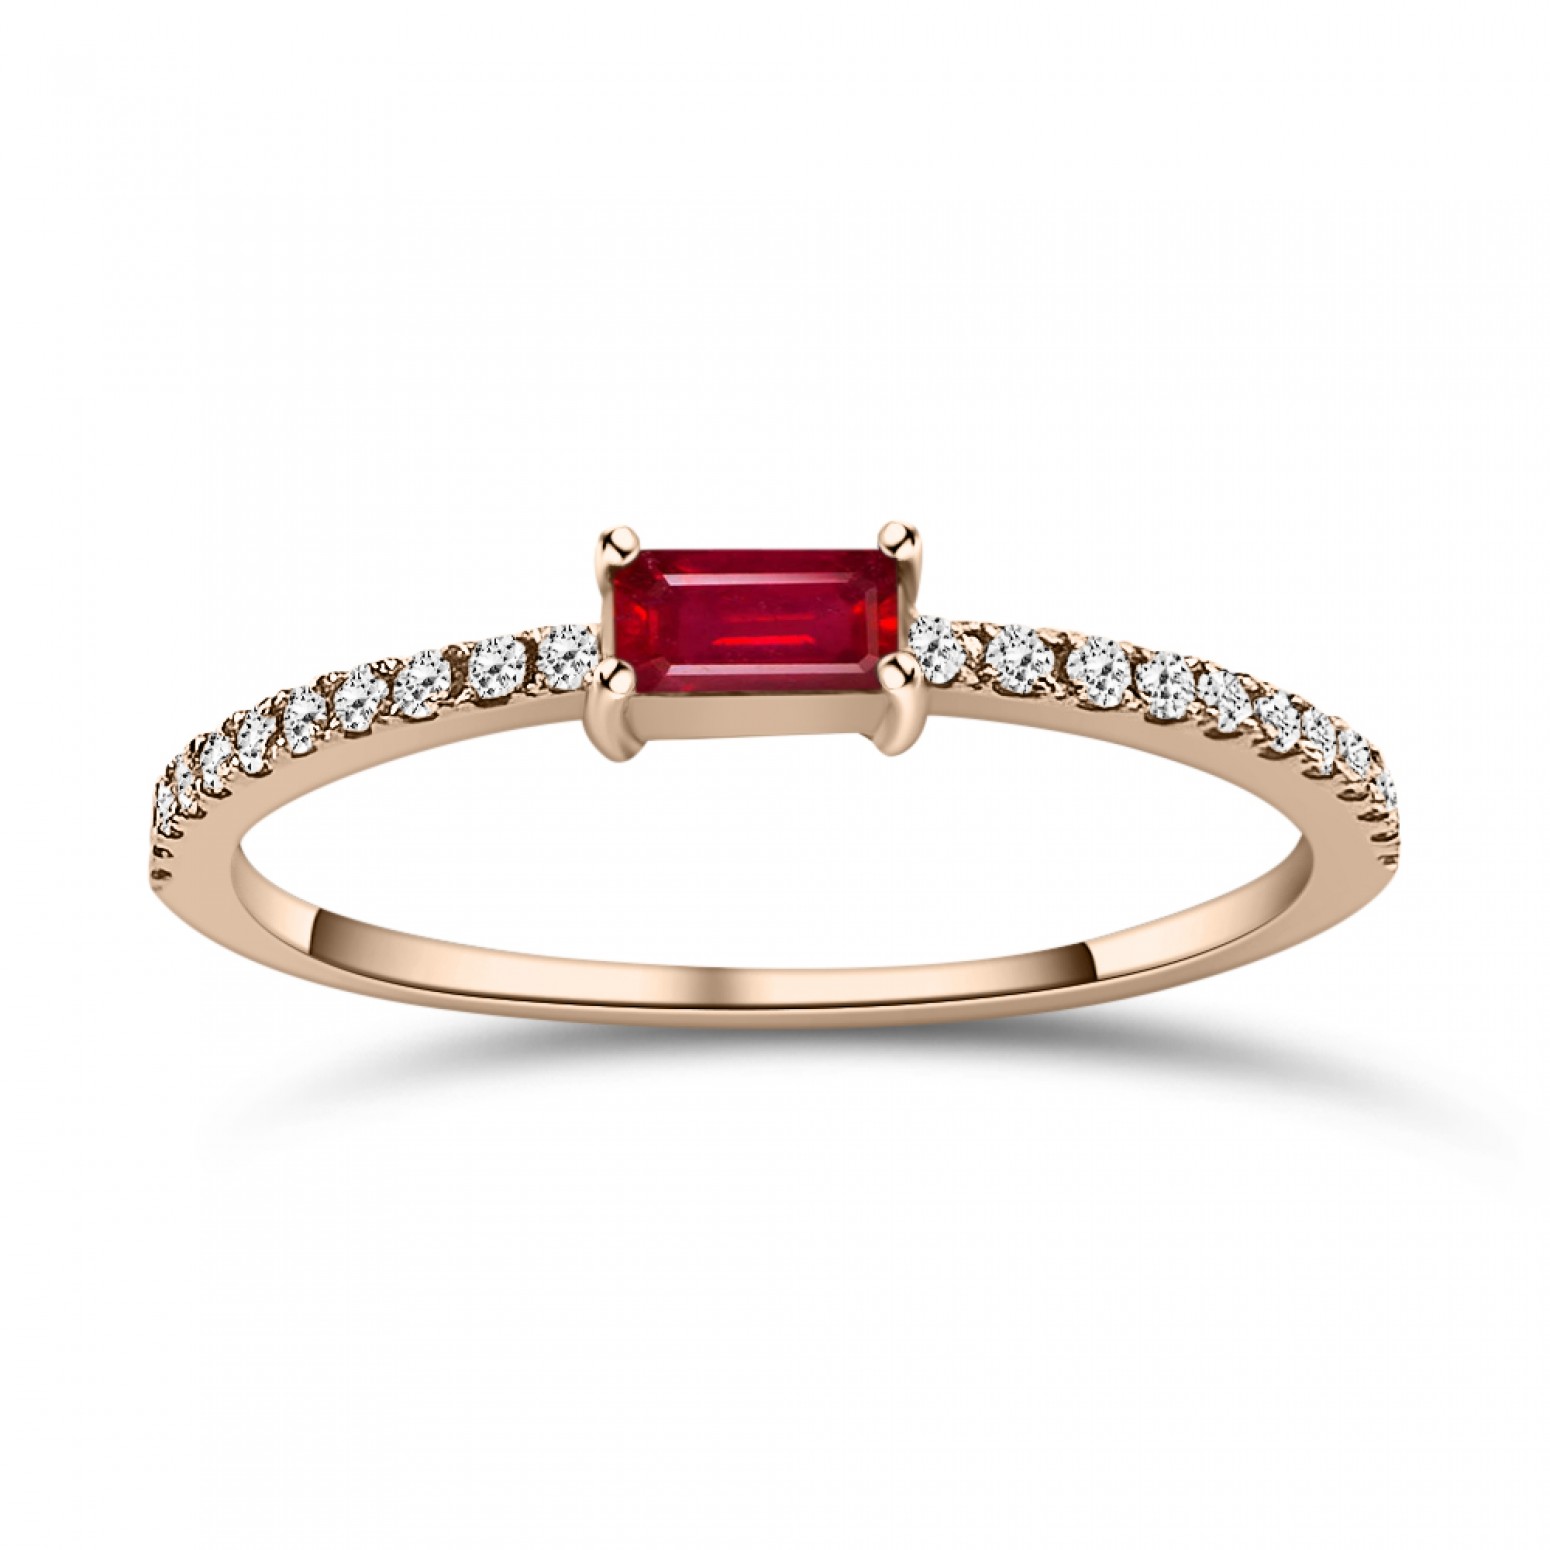 Solitaire ring 18K pink gold with ruby 0.14ct and diamonds 0.09ct VS1, H da4187 ENGAGEMENT RINGS Κοσμηματα - chrilia.gr